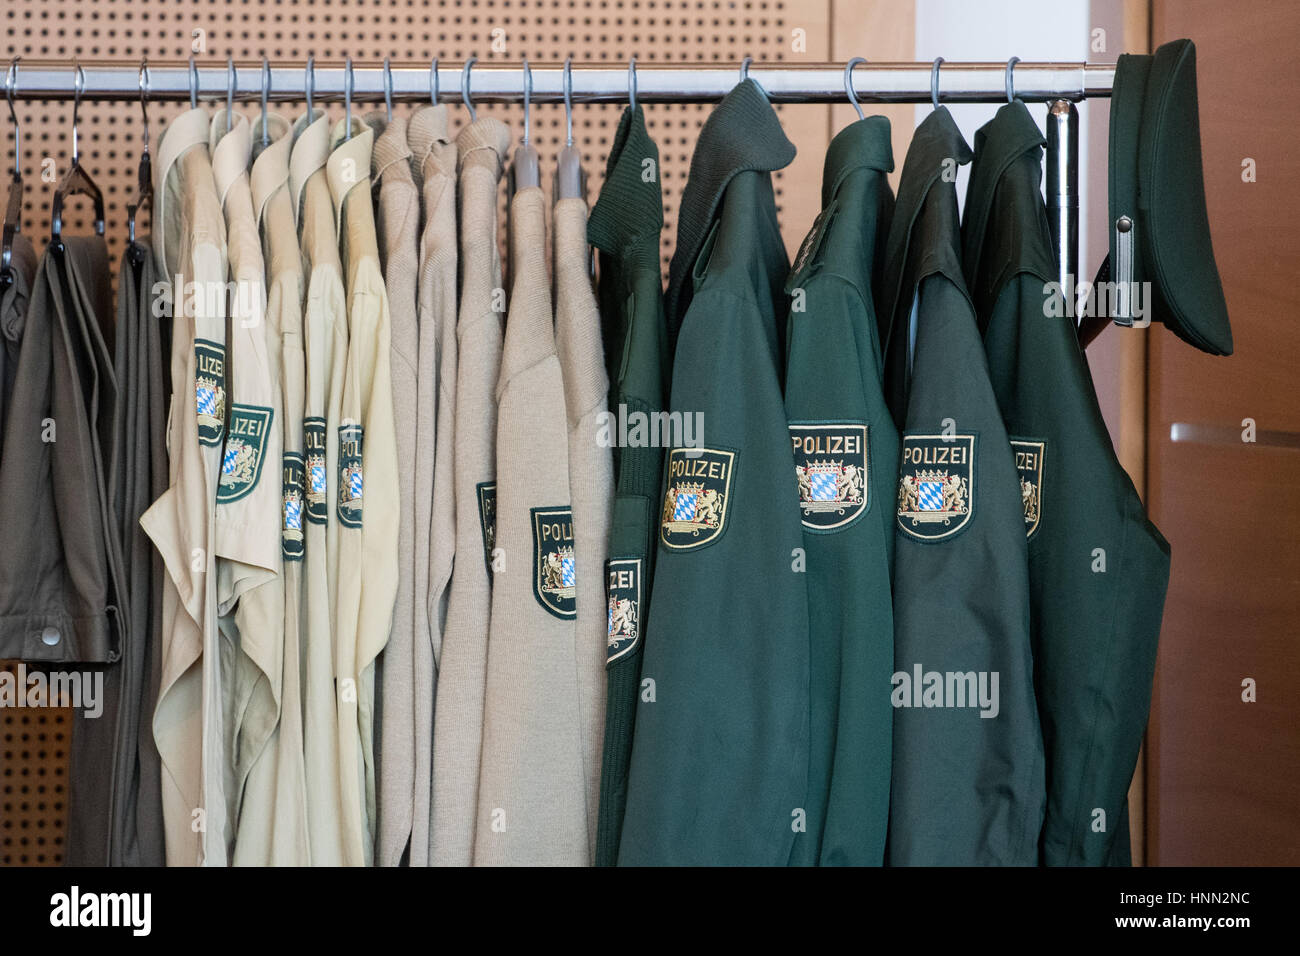 Straubing, Germany. 15th Feb, 2017. Old police uniforms hang on a coatrack in Straubing, Germany, 15 February 2017. The old, green uniforms will be remodeled after the Bavarian Police switches to blue uniforms. Photo: Armin Weigel/dpa/Alamy Live News Stock Photo